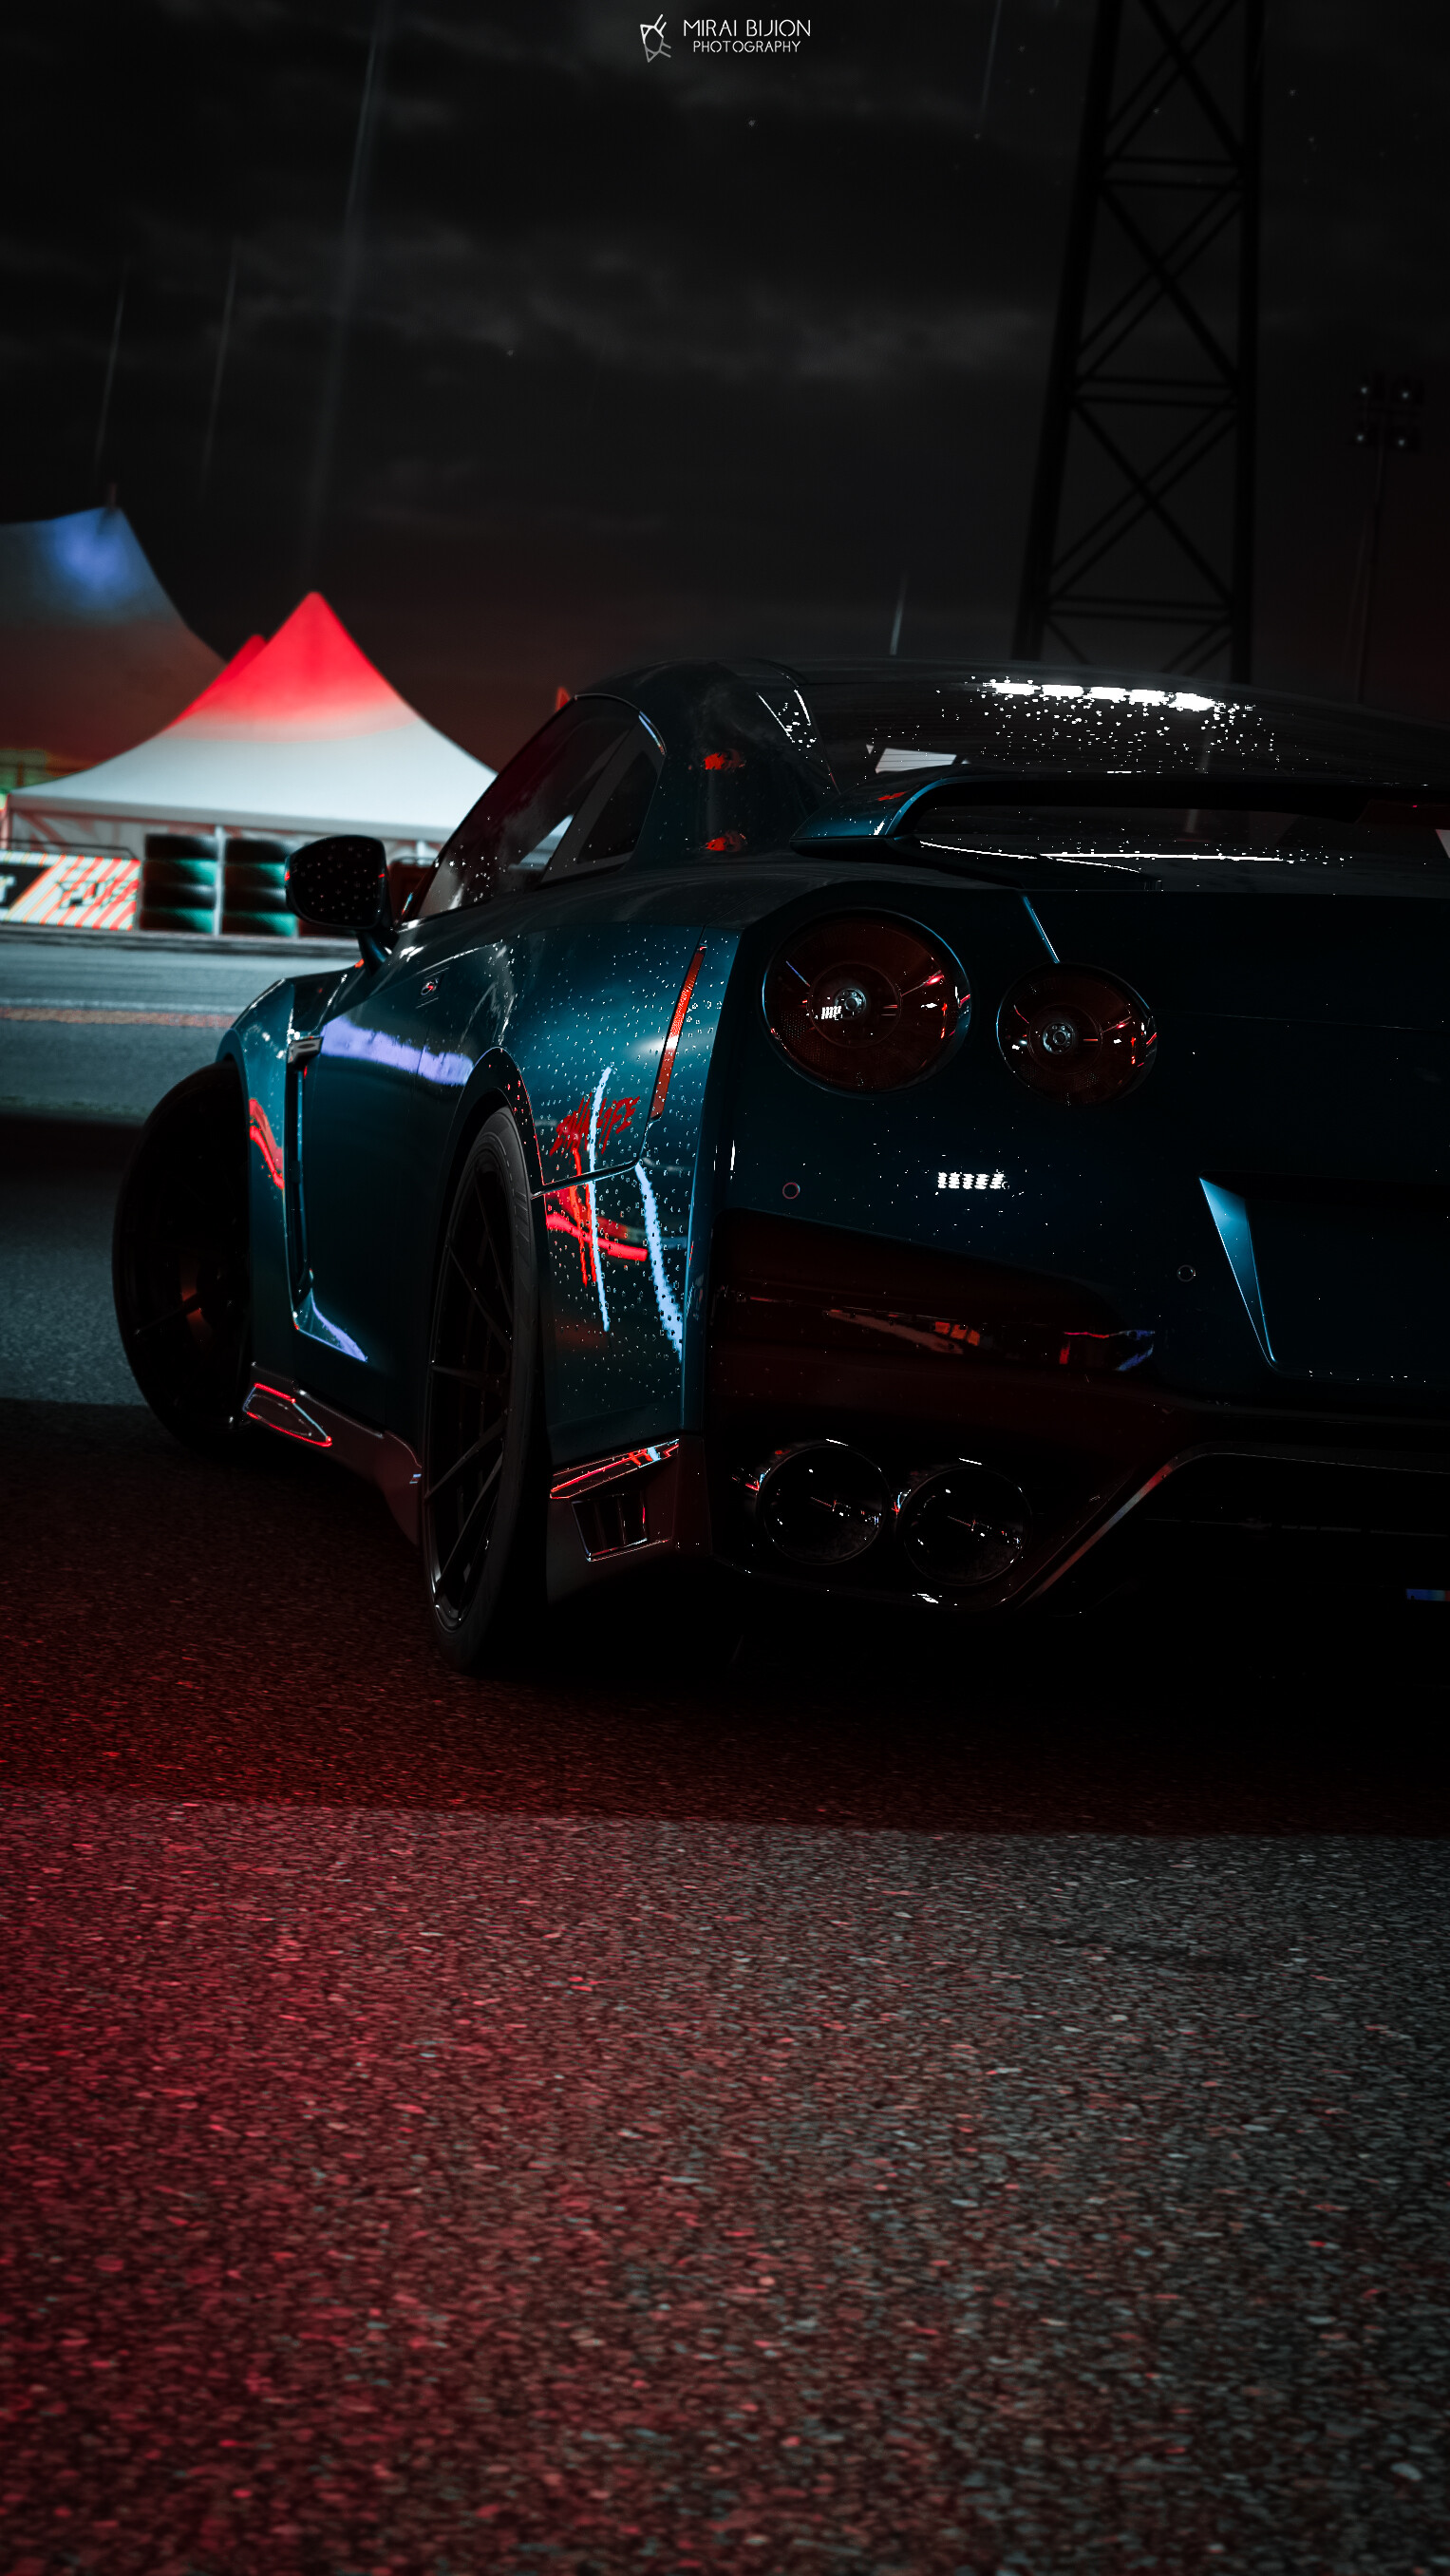 dark, sports car, back view, wet, sports, cars, car, machine, rear view images